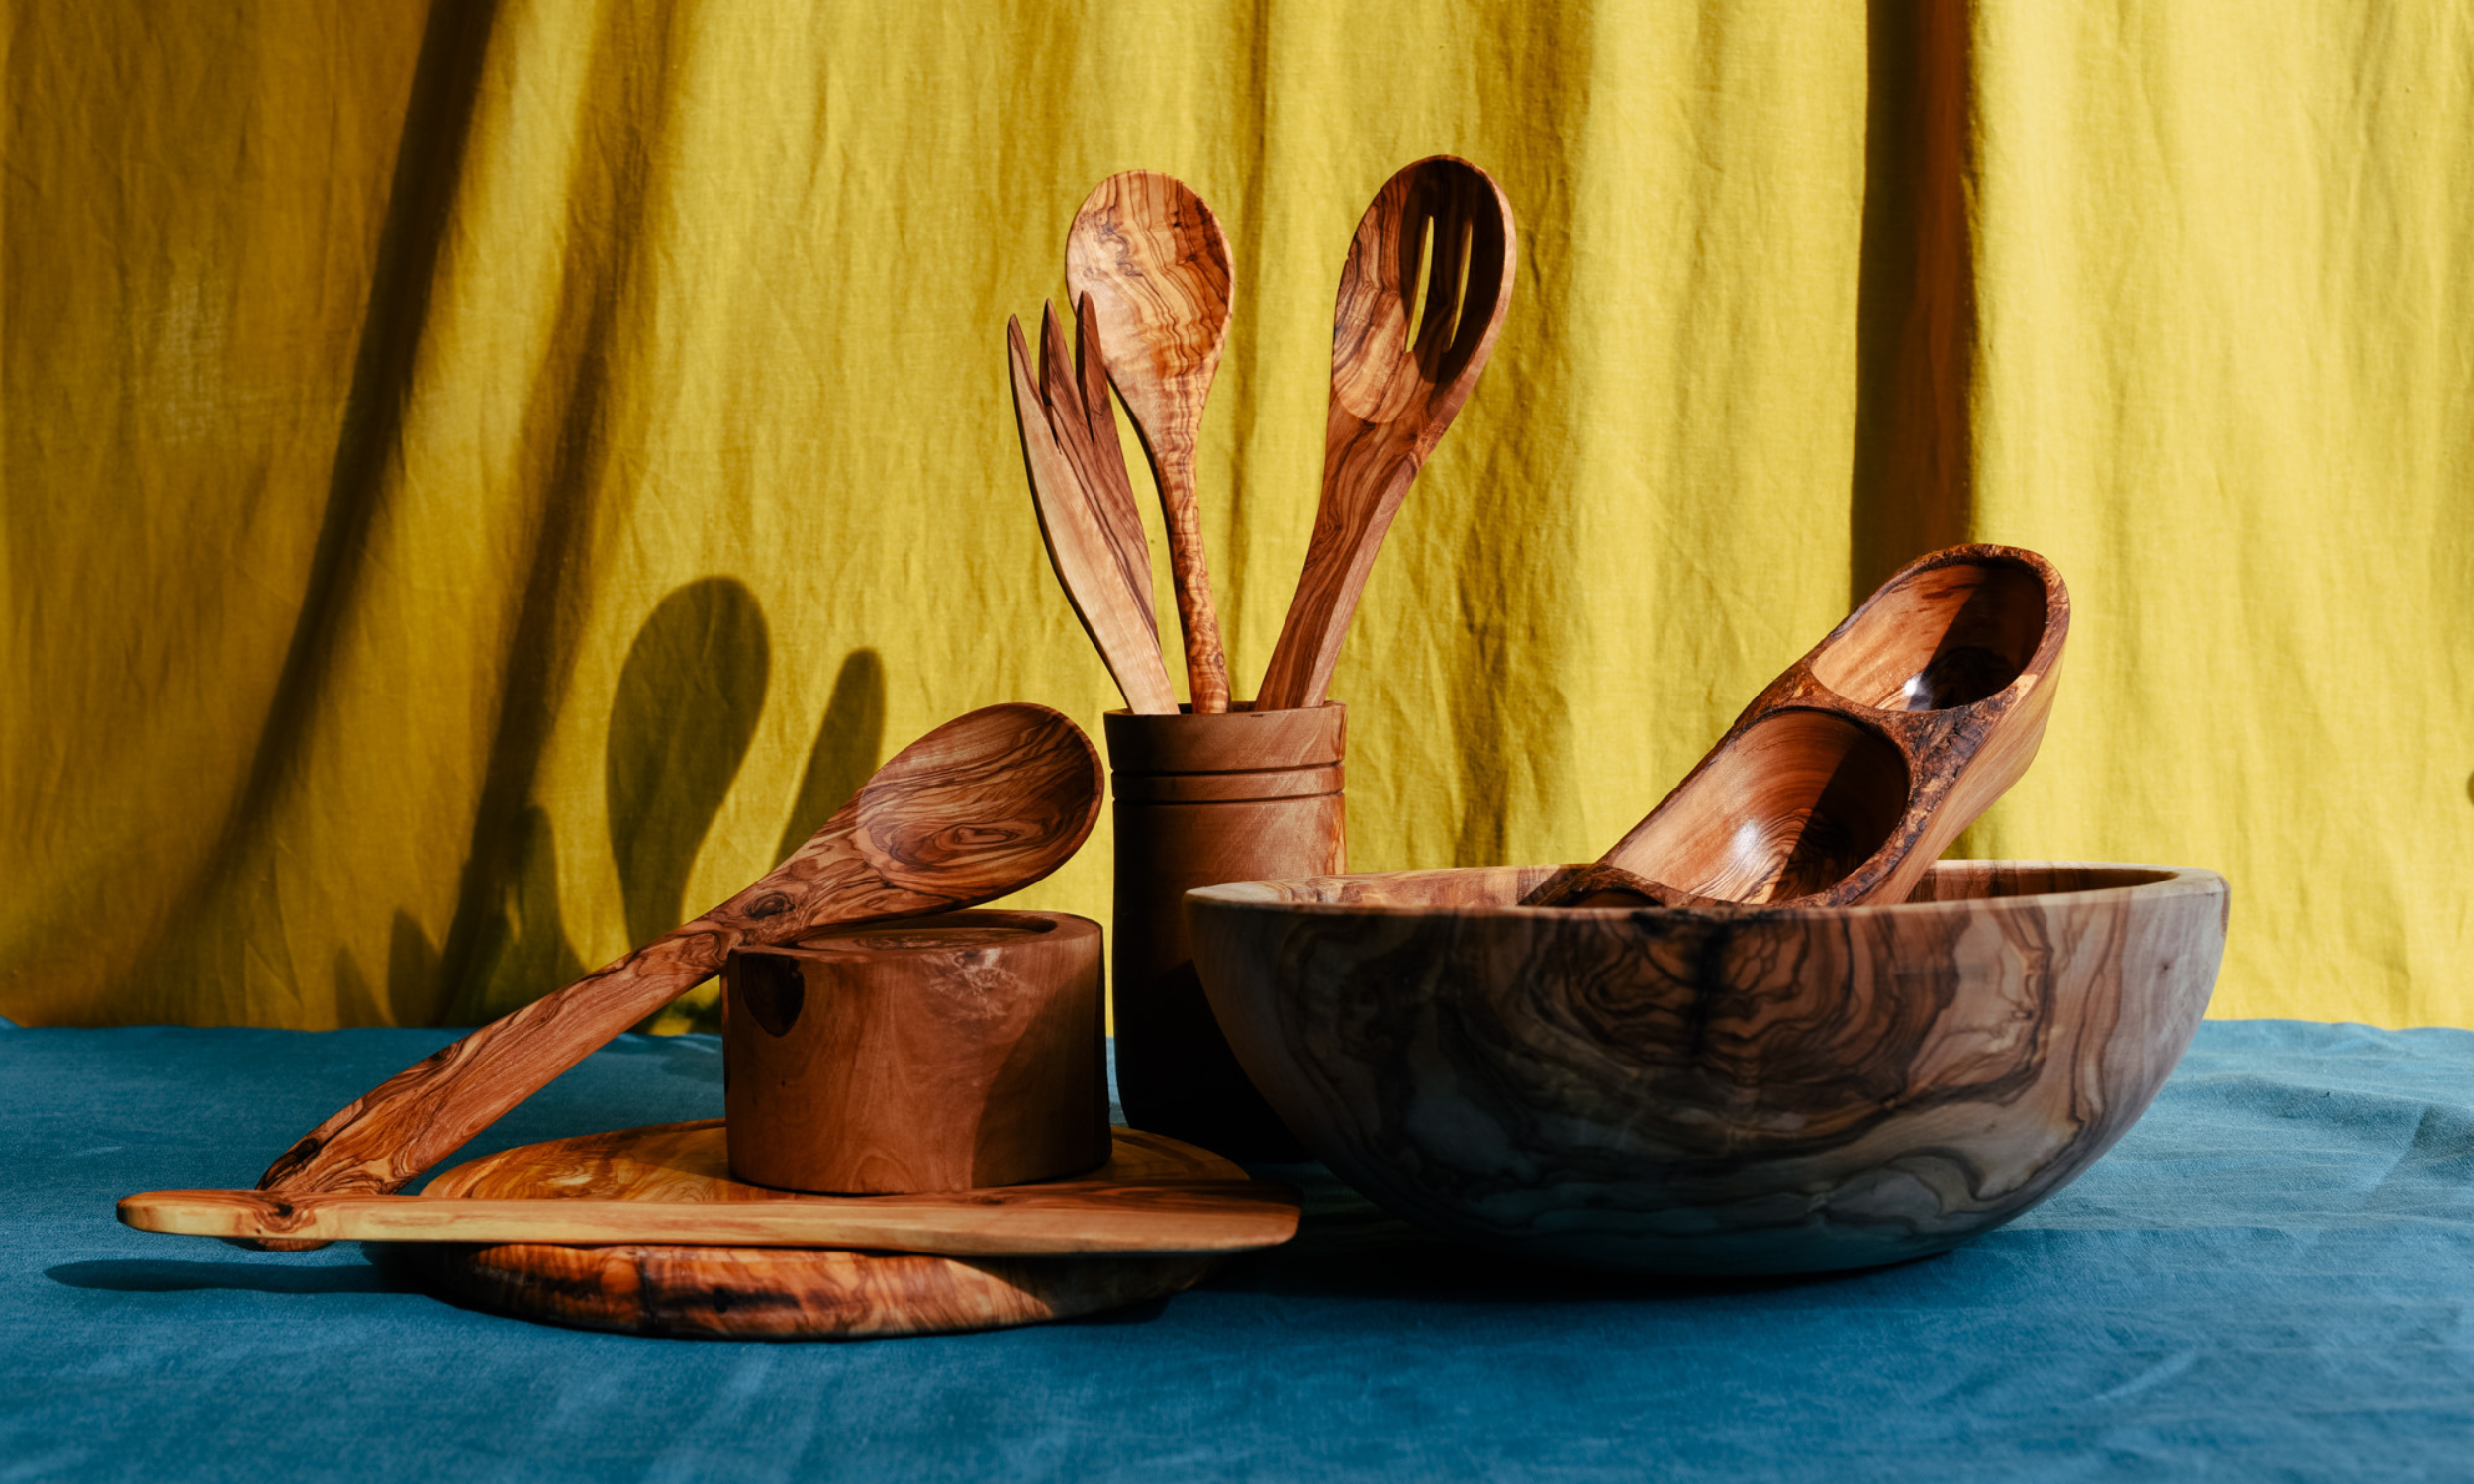 South_Texas_Ranch_-_Texas_Olive_Ranch_-_Best_Southern_Family_Farmers_-_Best_Texas_Made_Ingredients_Grown_in_the_South_USA_-_Olive_Wood_Kitchenware.png